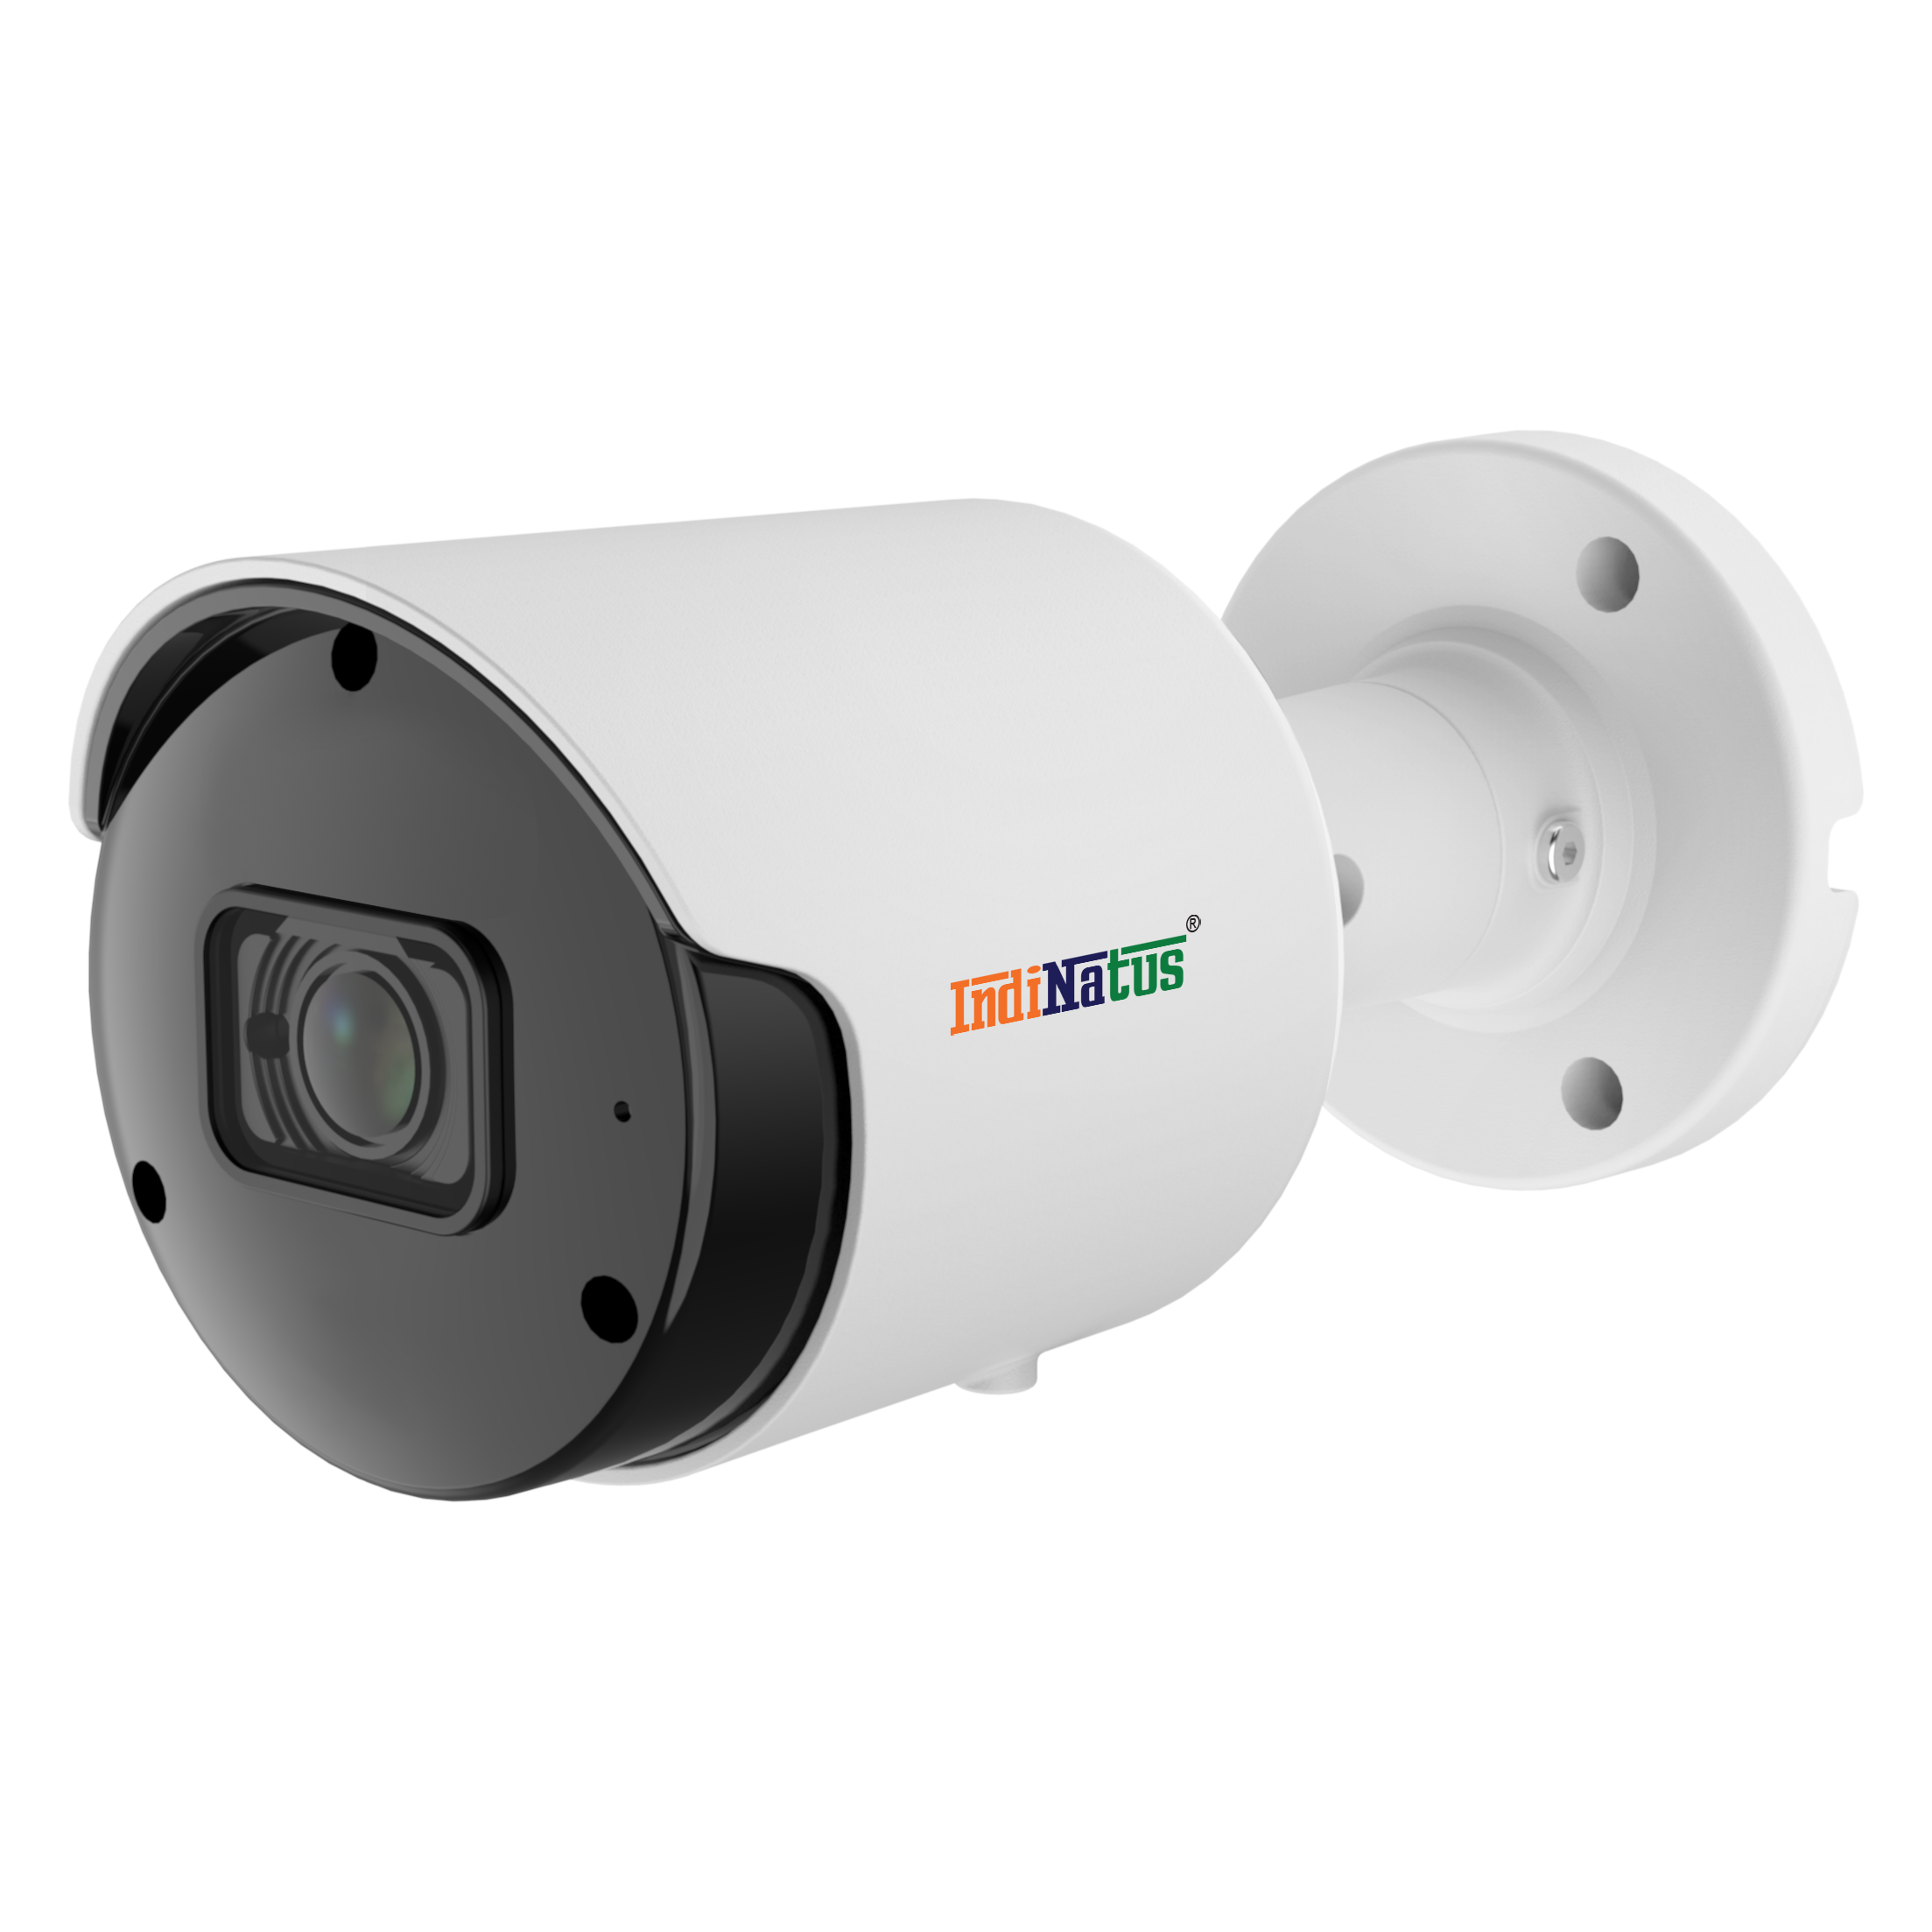 IN-IPC2N22P-I5 (M)K, 2-Megapixel IR & WDR, Outdoor Fixed IP Bullet Camera IndiNatus® India Private Limited - India Ka Apna Brand, Indian CCTV  Brand,  Make In India CCTV camera, Make in india cctv camera brand available on gem portal, IP Network Camera, Indian brand CCTV Camera 